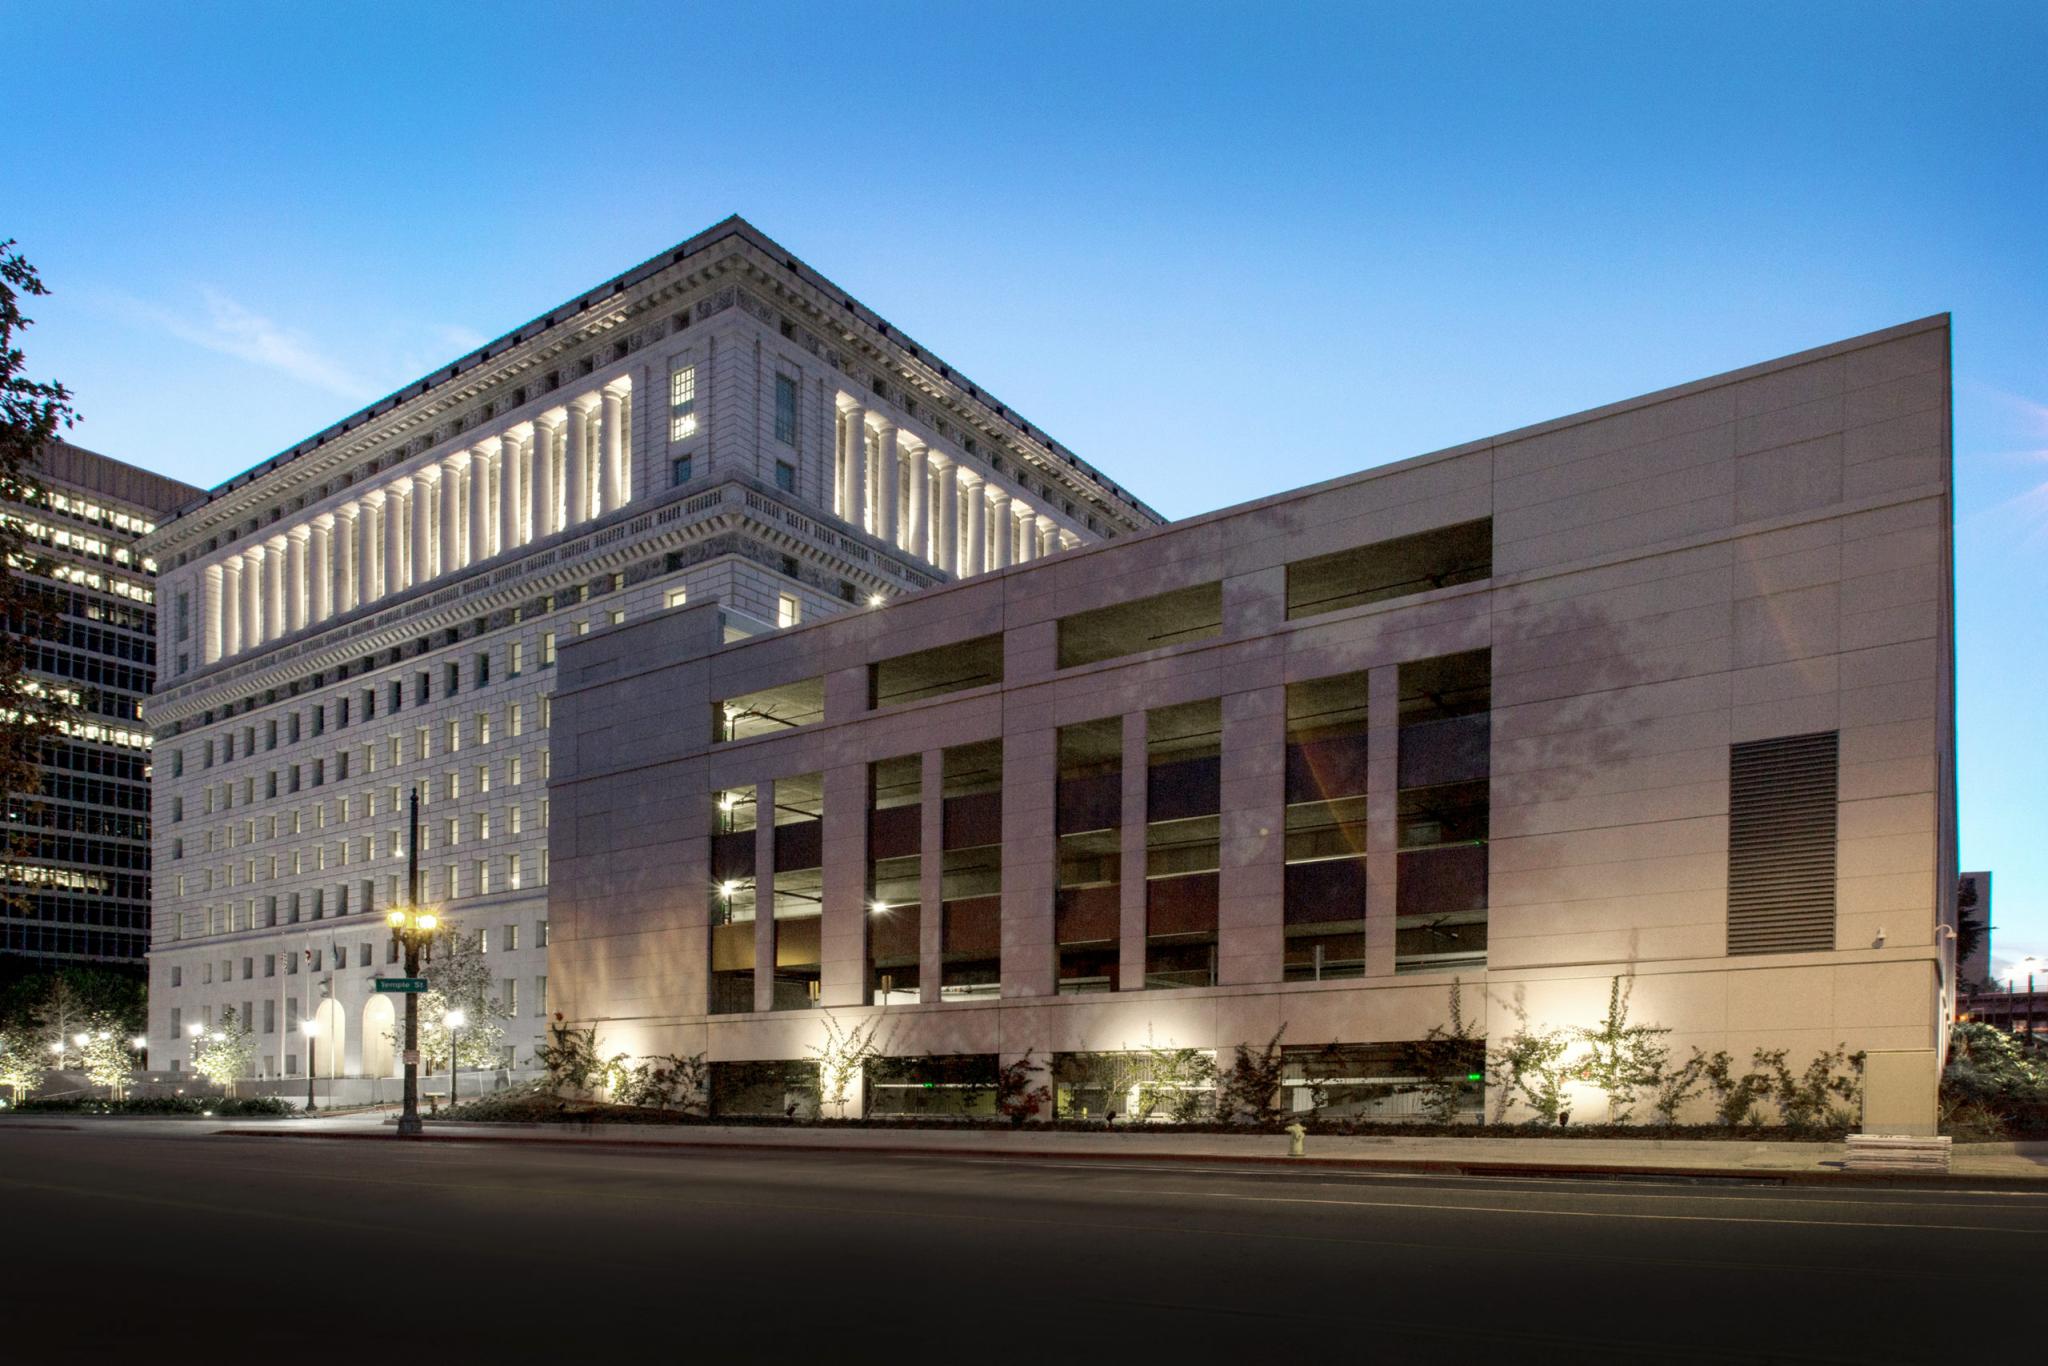 Exterior Picture of the Los Angeles County Hall of Justice Building During the Day